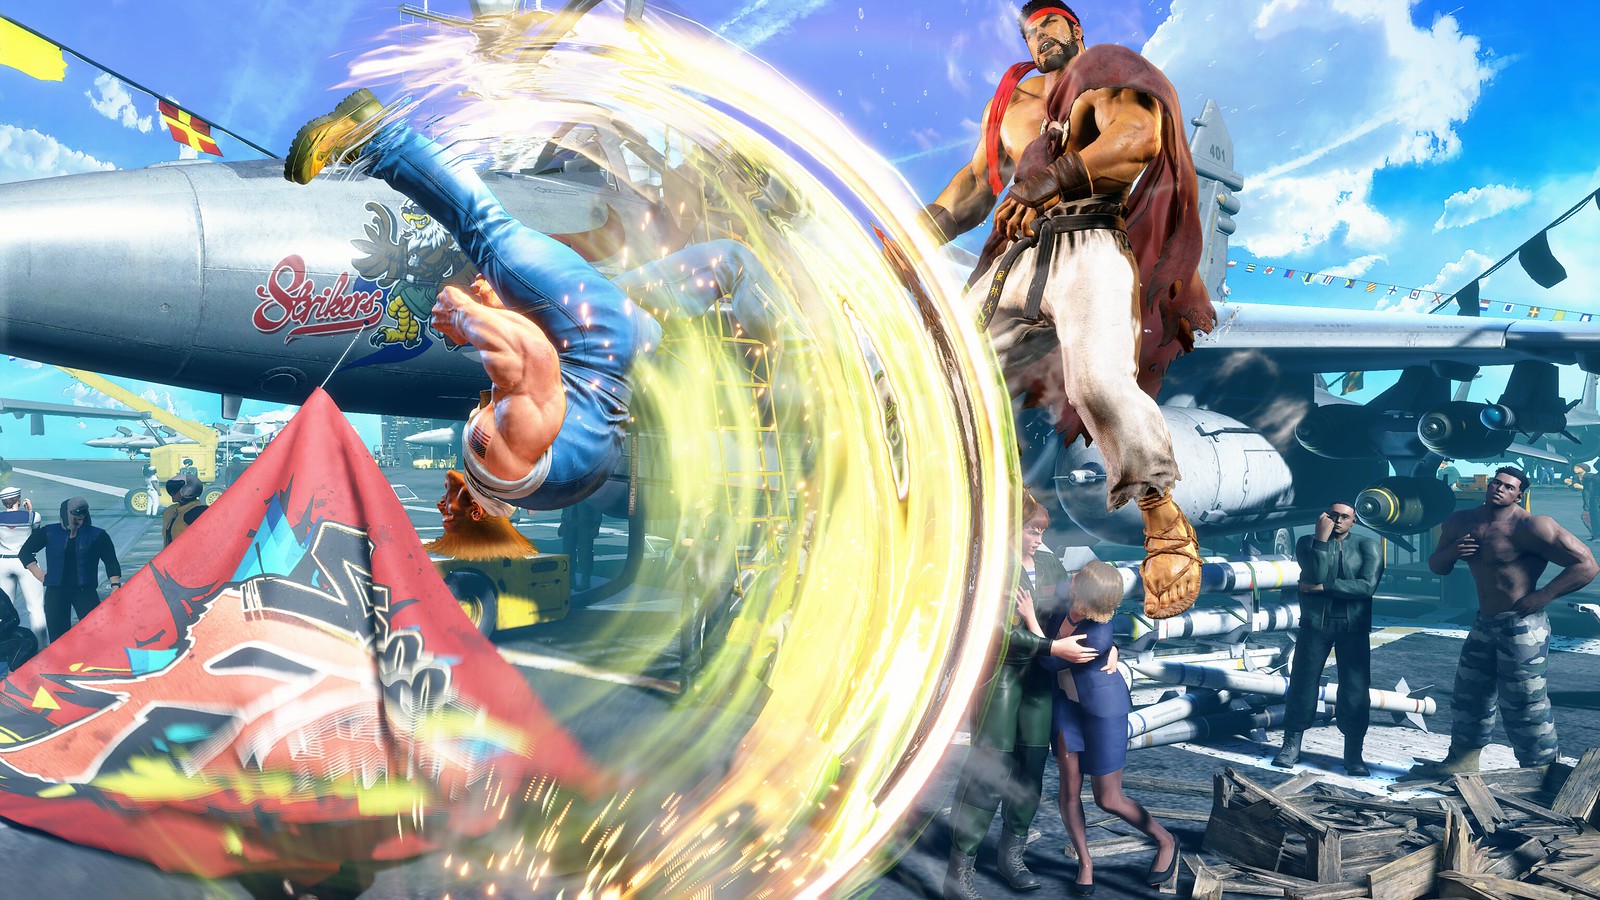 Guile joins Street Fighter V this month & anti-rage quit system implemented  – PlayStation.Blog